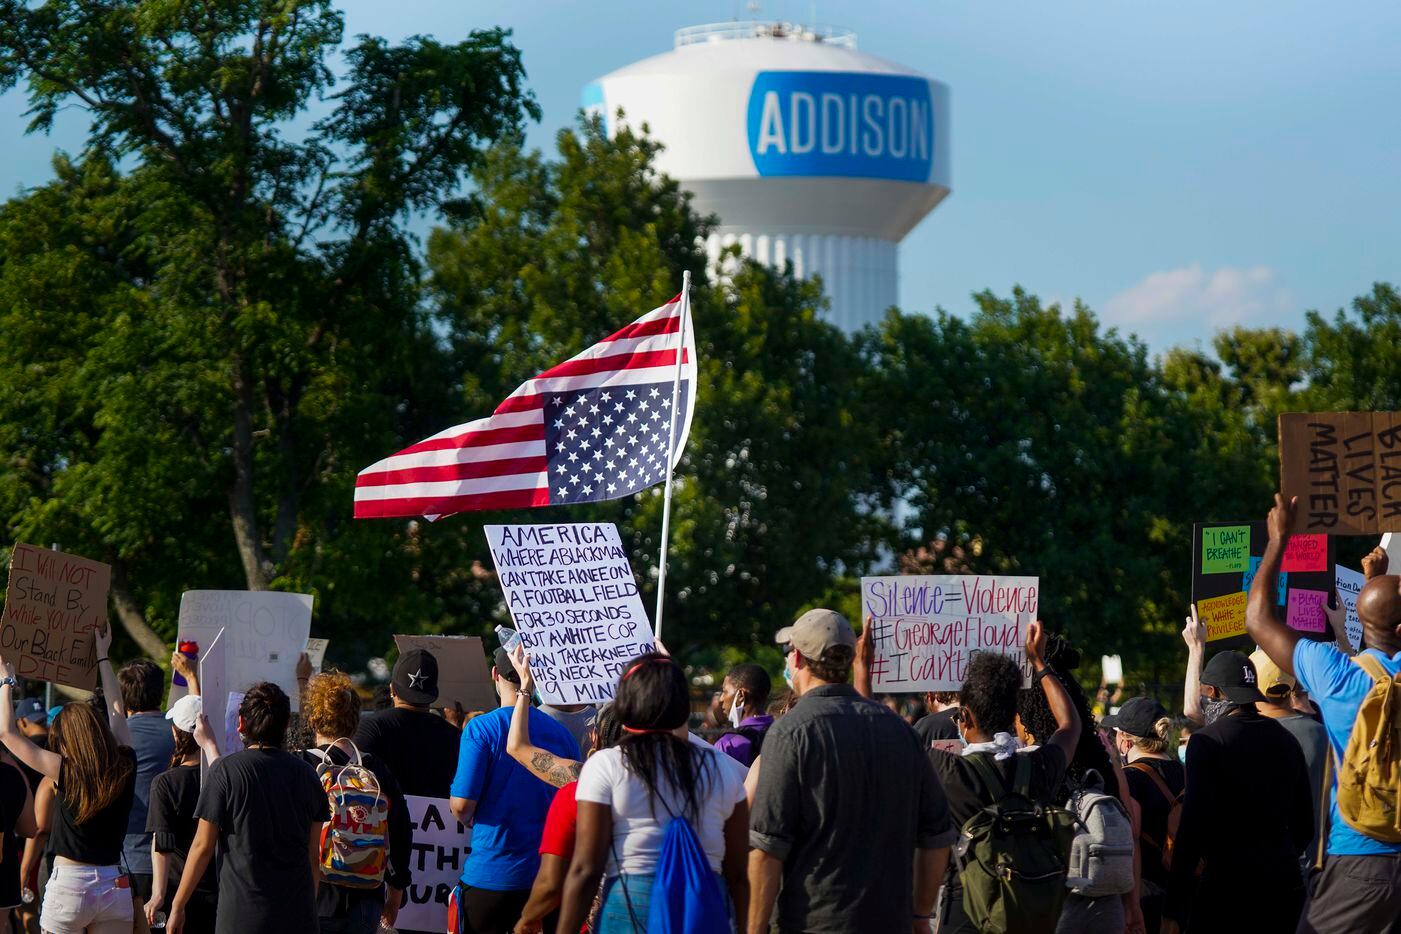 Demonstrators march on the Addison Road toward Addison Circle Park during a protest on...